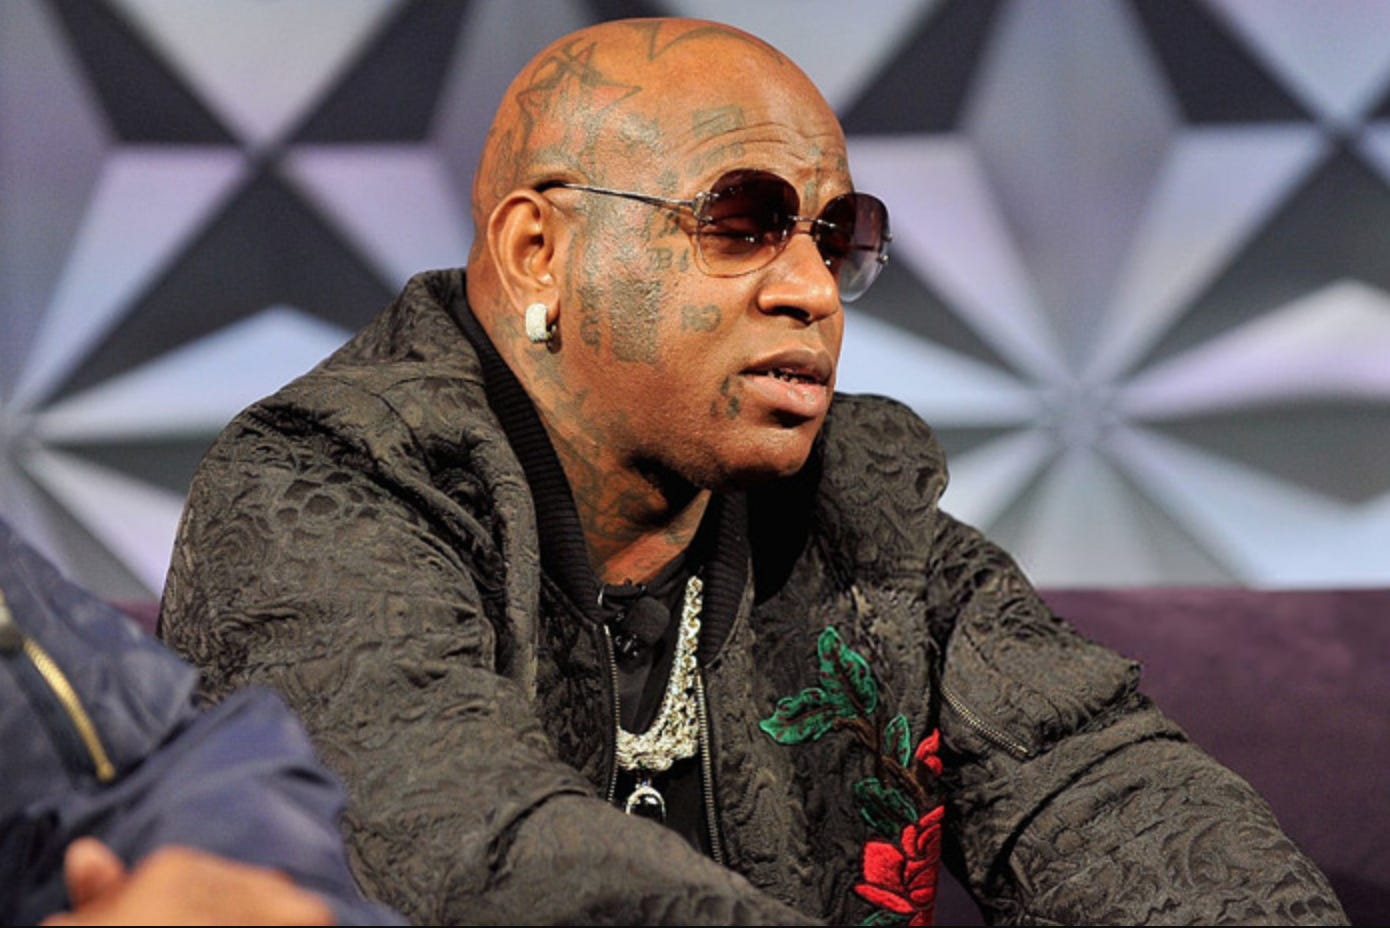 Birdman A Man With Many Face Tattoos Would Like To Get All Of His within measurements 1390 X 928